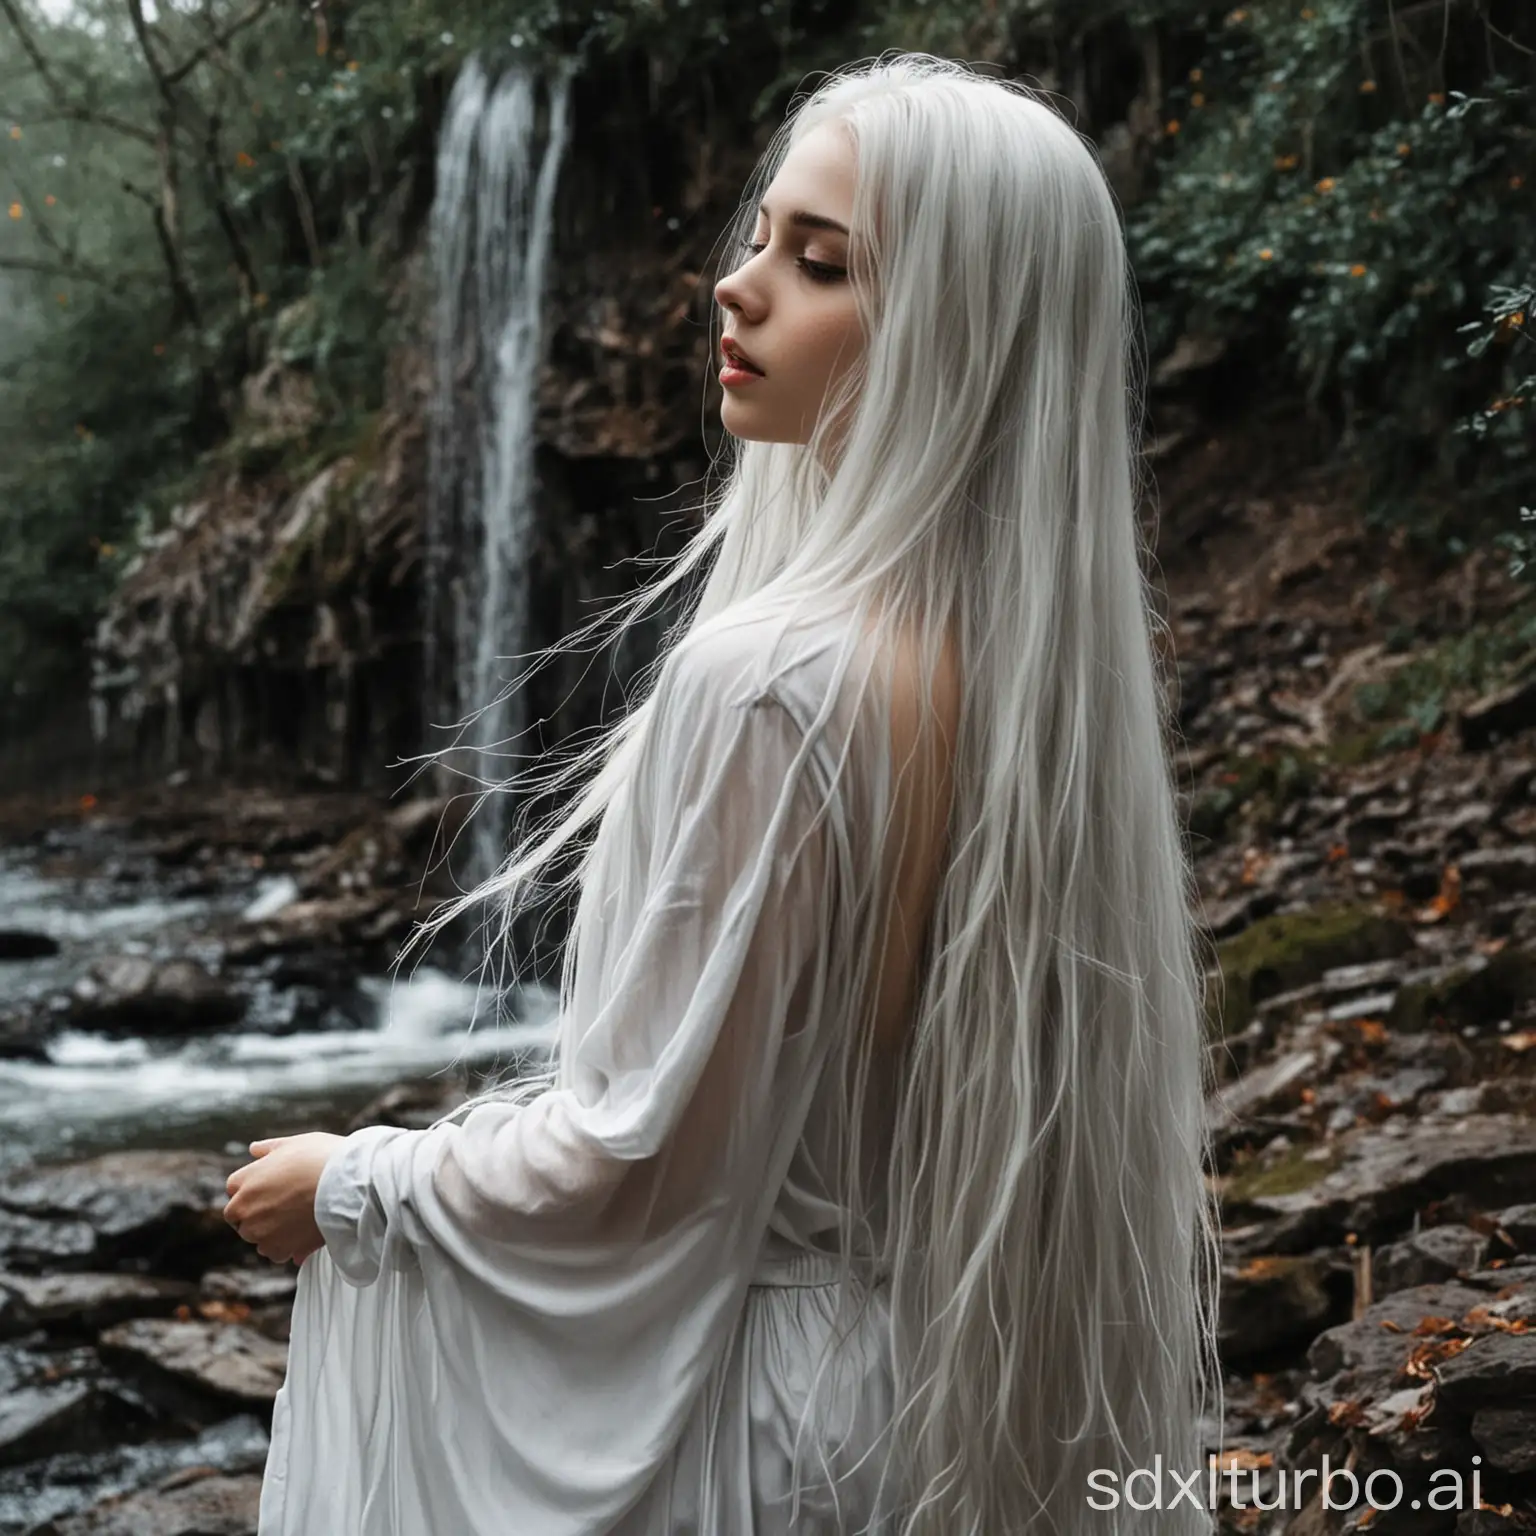 she her beautiful head of grayish-white long hair flowing down like a waterfall, as if a piece of silk, the ends already soaked in blood.